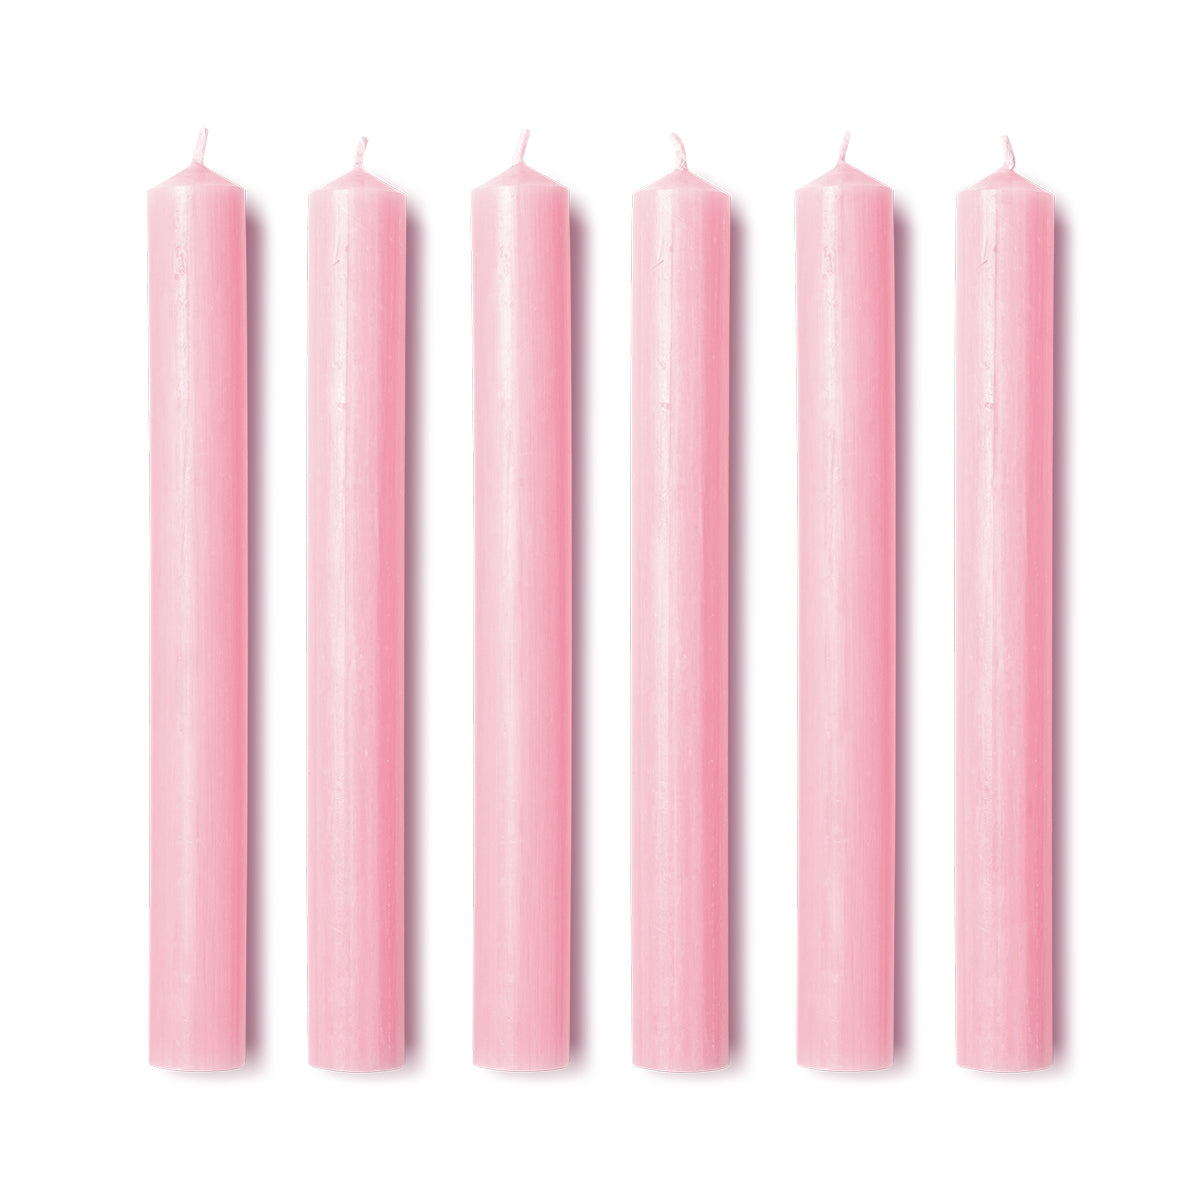 Dinner Candles in Marguerite Pink